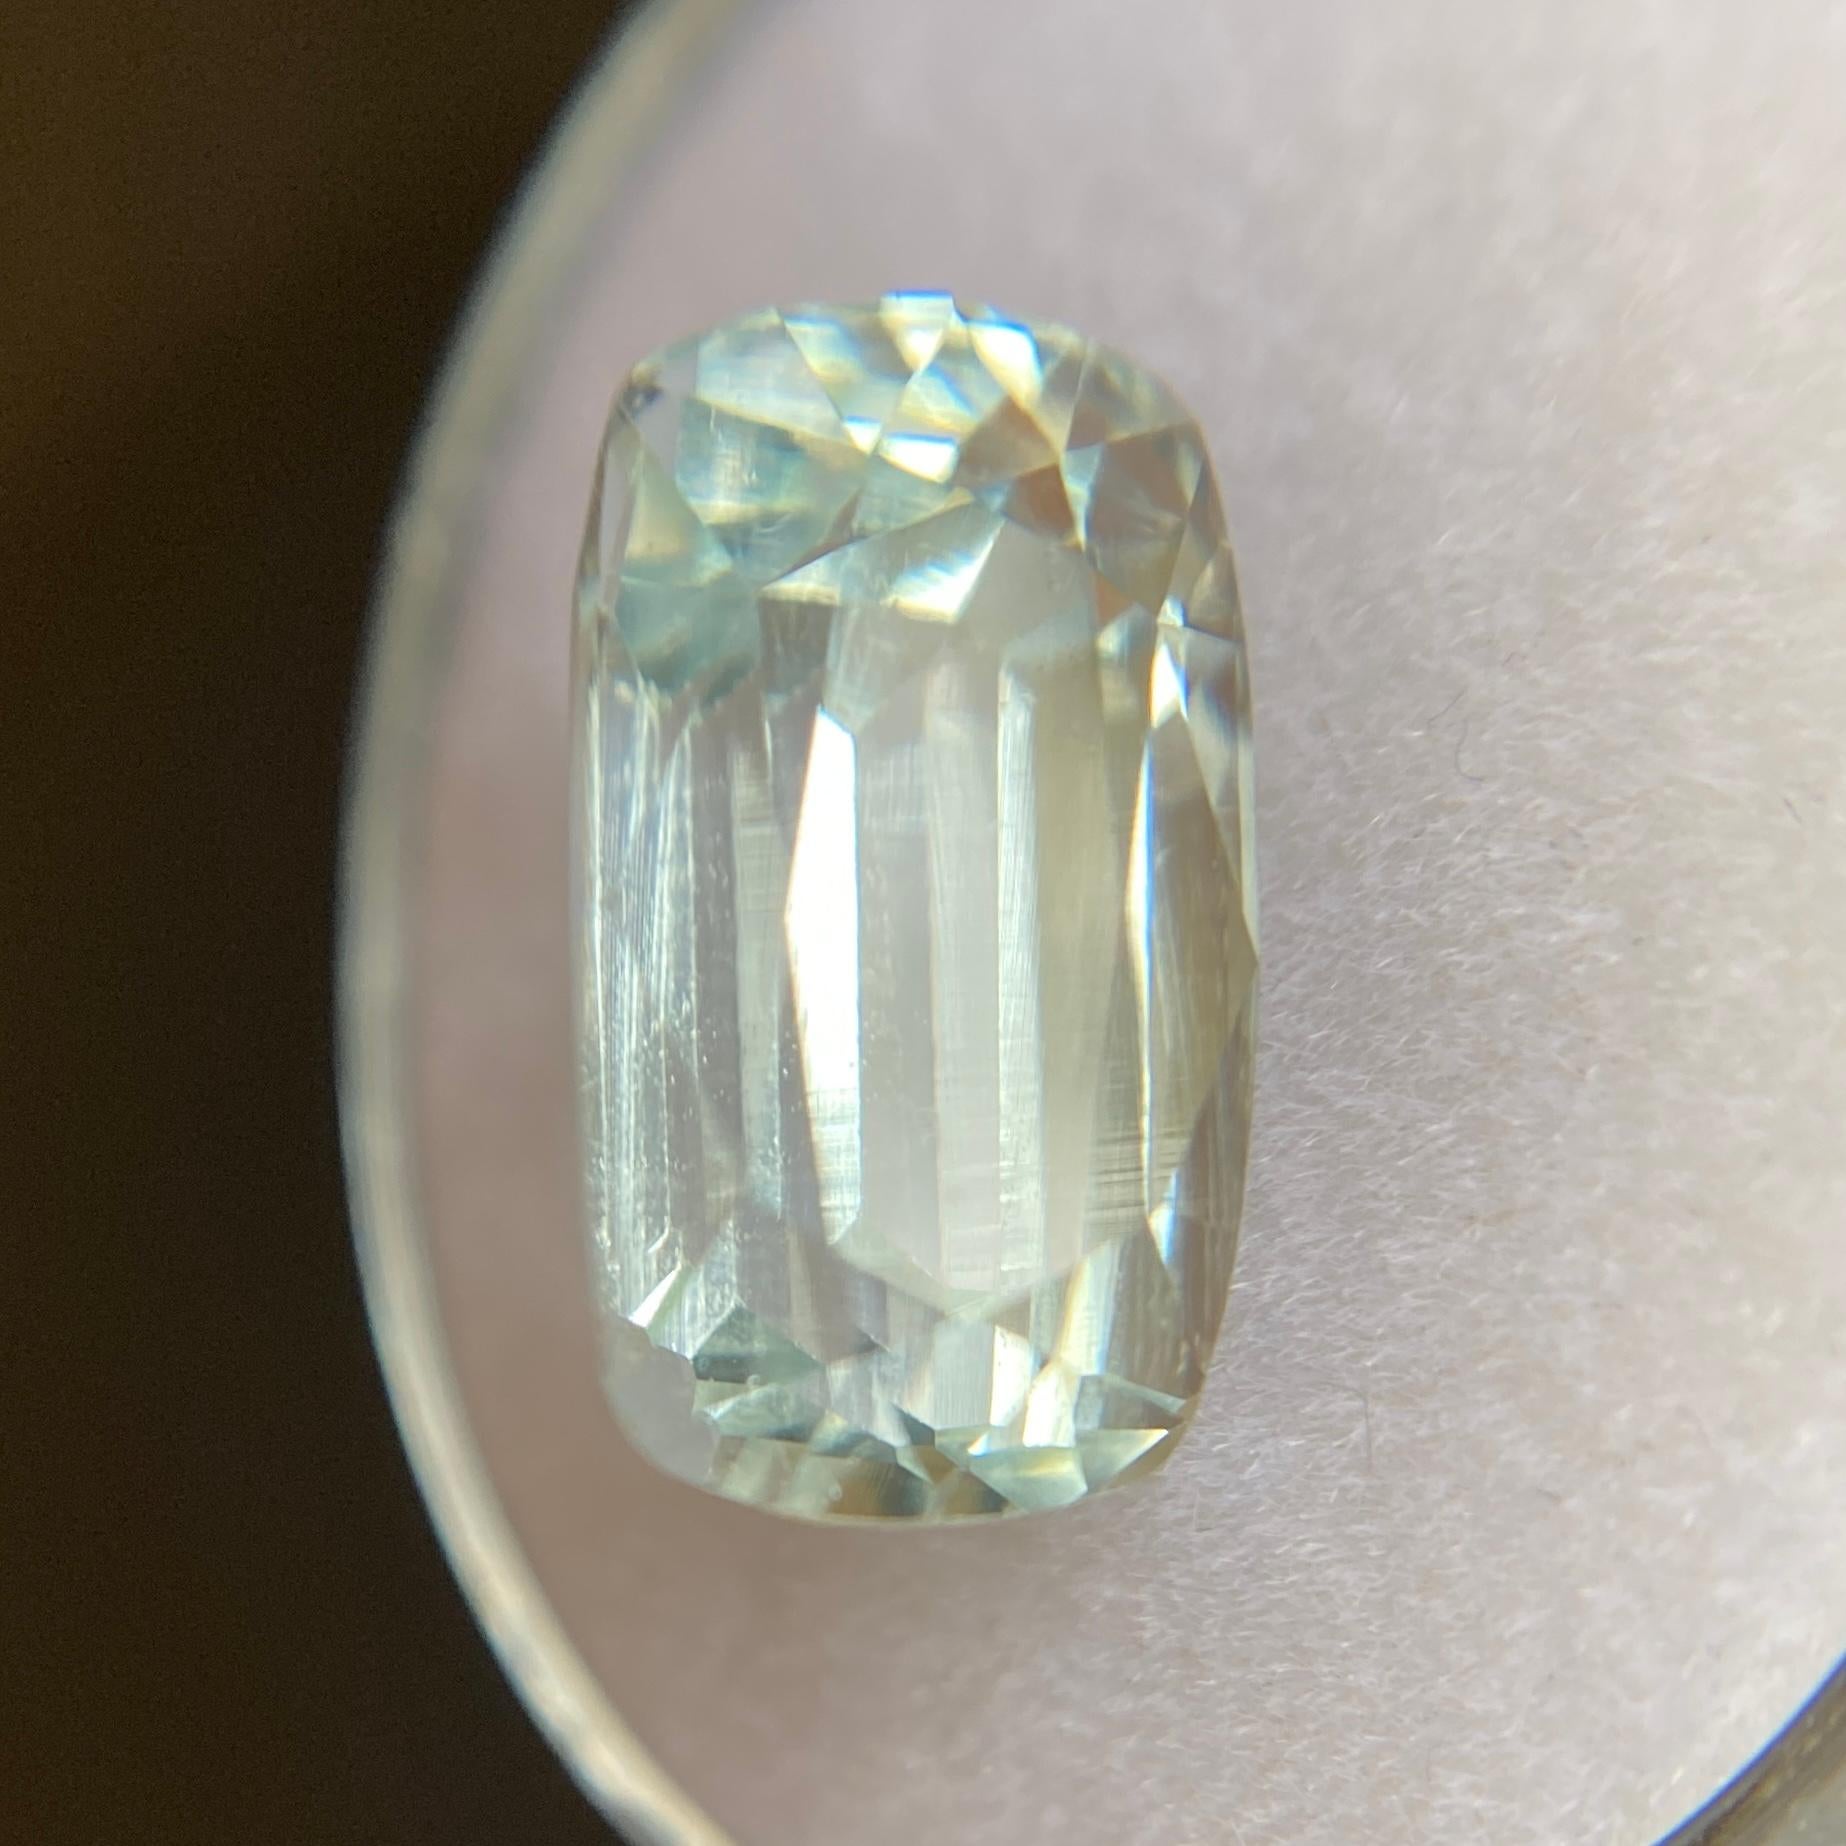 Natural Blue Aquamarine Gemstone.

5.98 Carat with a light blue colour and good clarity. A a clean gem with only some small natural inclusions visible when looking closely.

Also has an excellent cushion cut with ideal polish to show great shine and